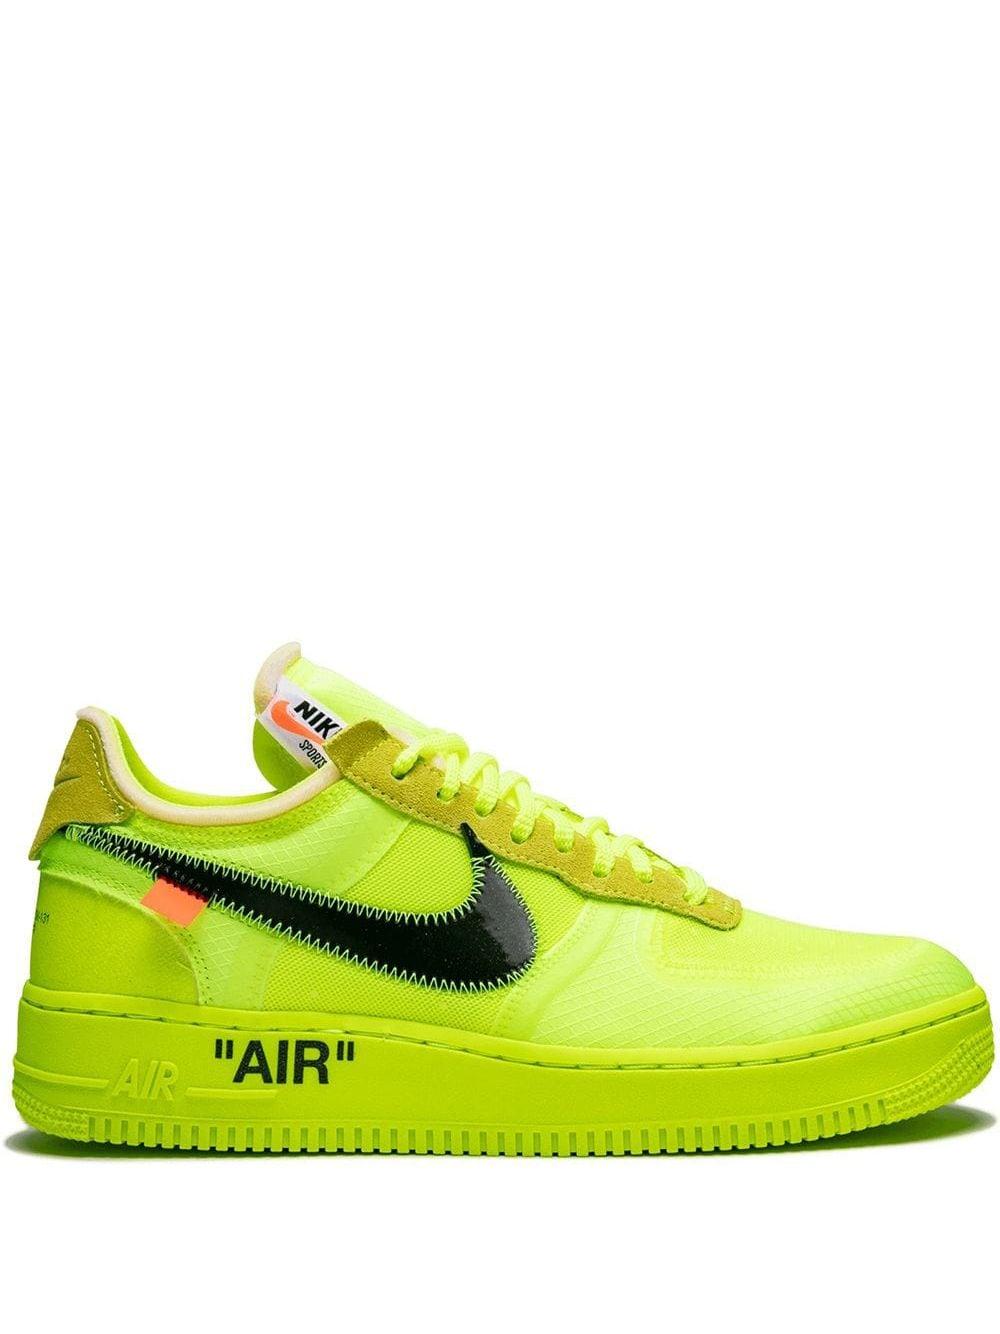 NIKE X OFF-WHITE The 10: Air Force 1 Low 'off-white Volt' Shoes in Green  (Yellow) for Men - Save 7% | Lyst